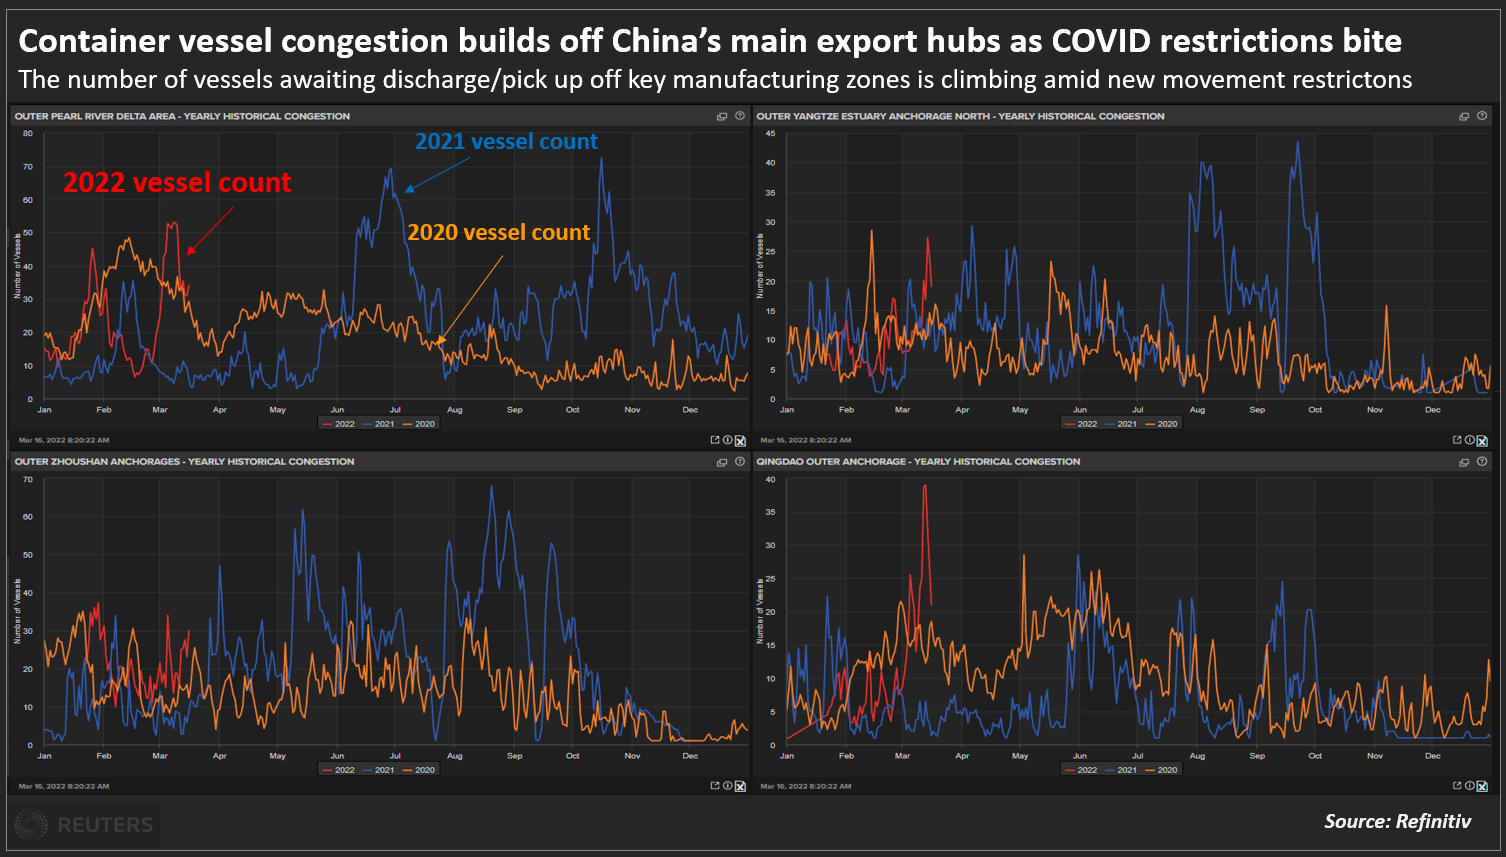 Container ship congestion leans on China's major export hubs as COVID restrictions bite